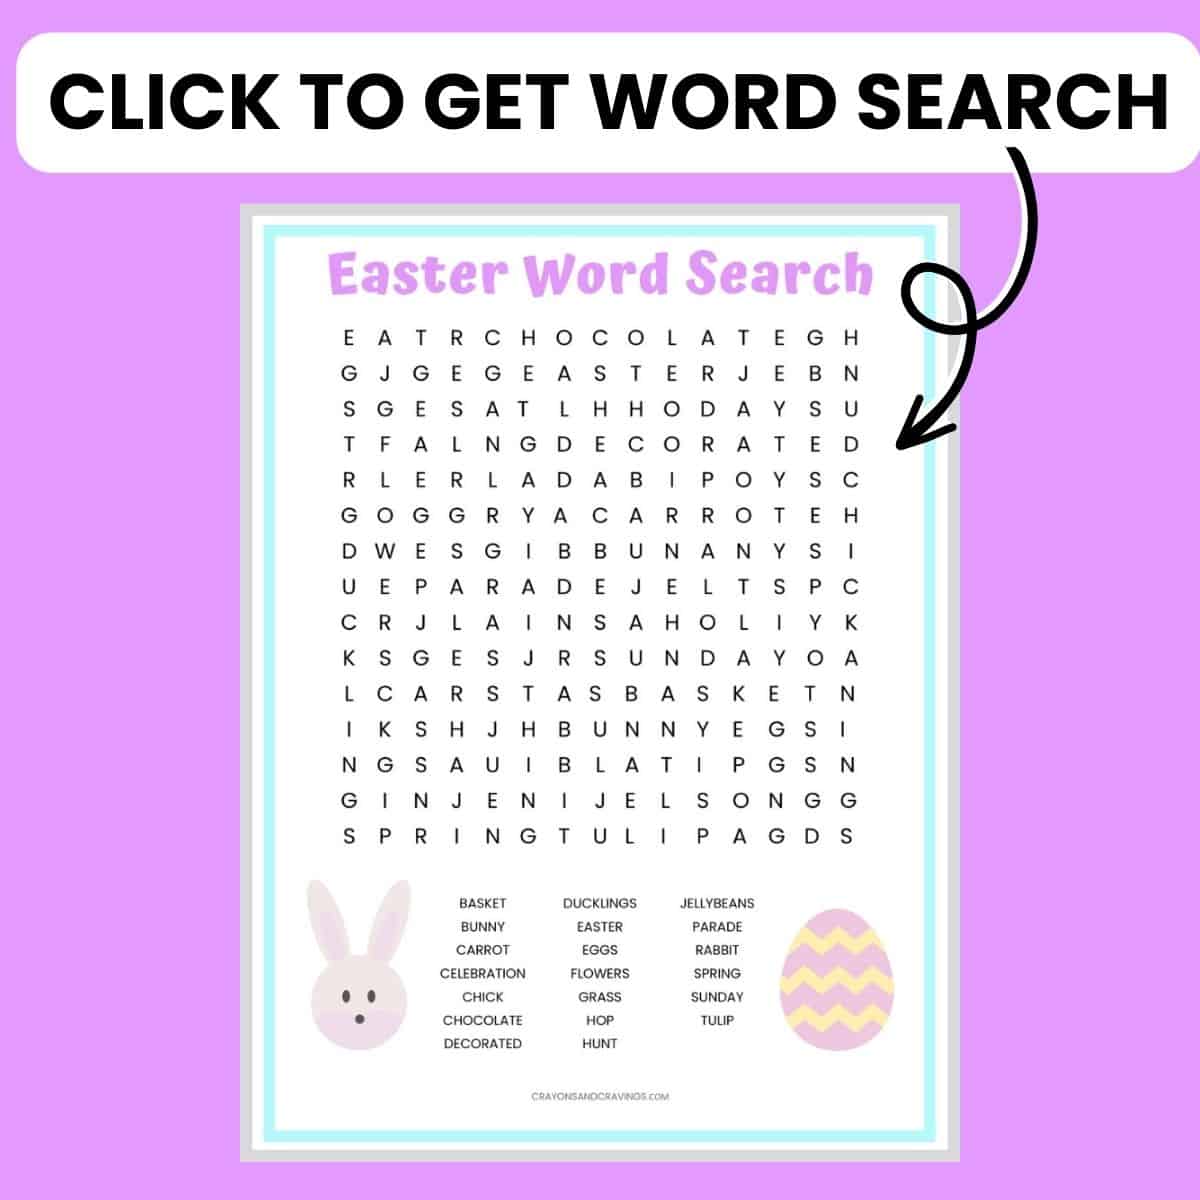 Click here to get Easter Word Search.